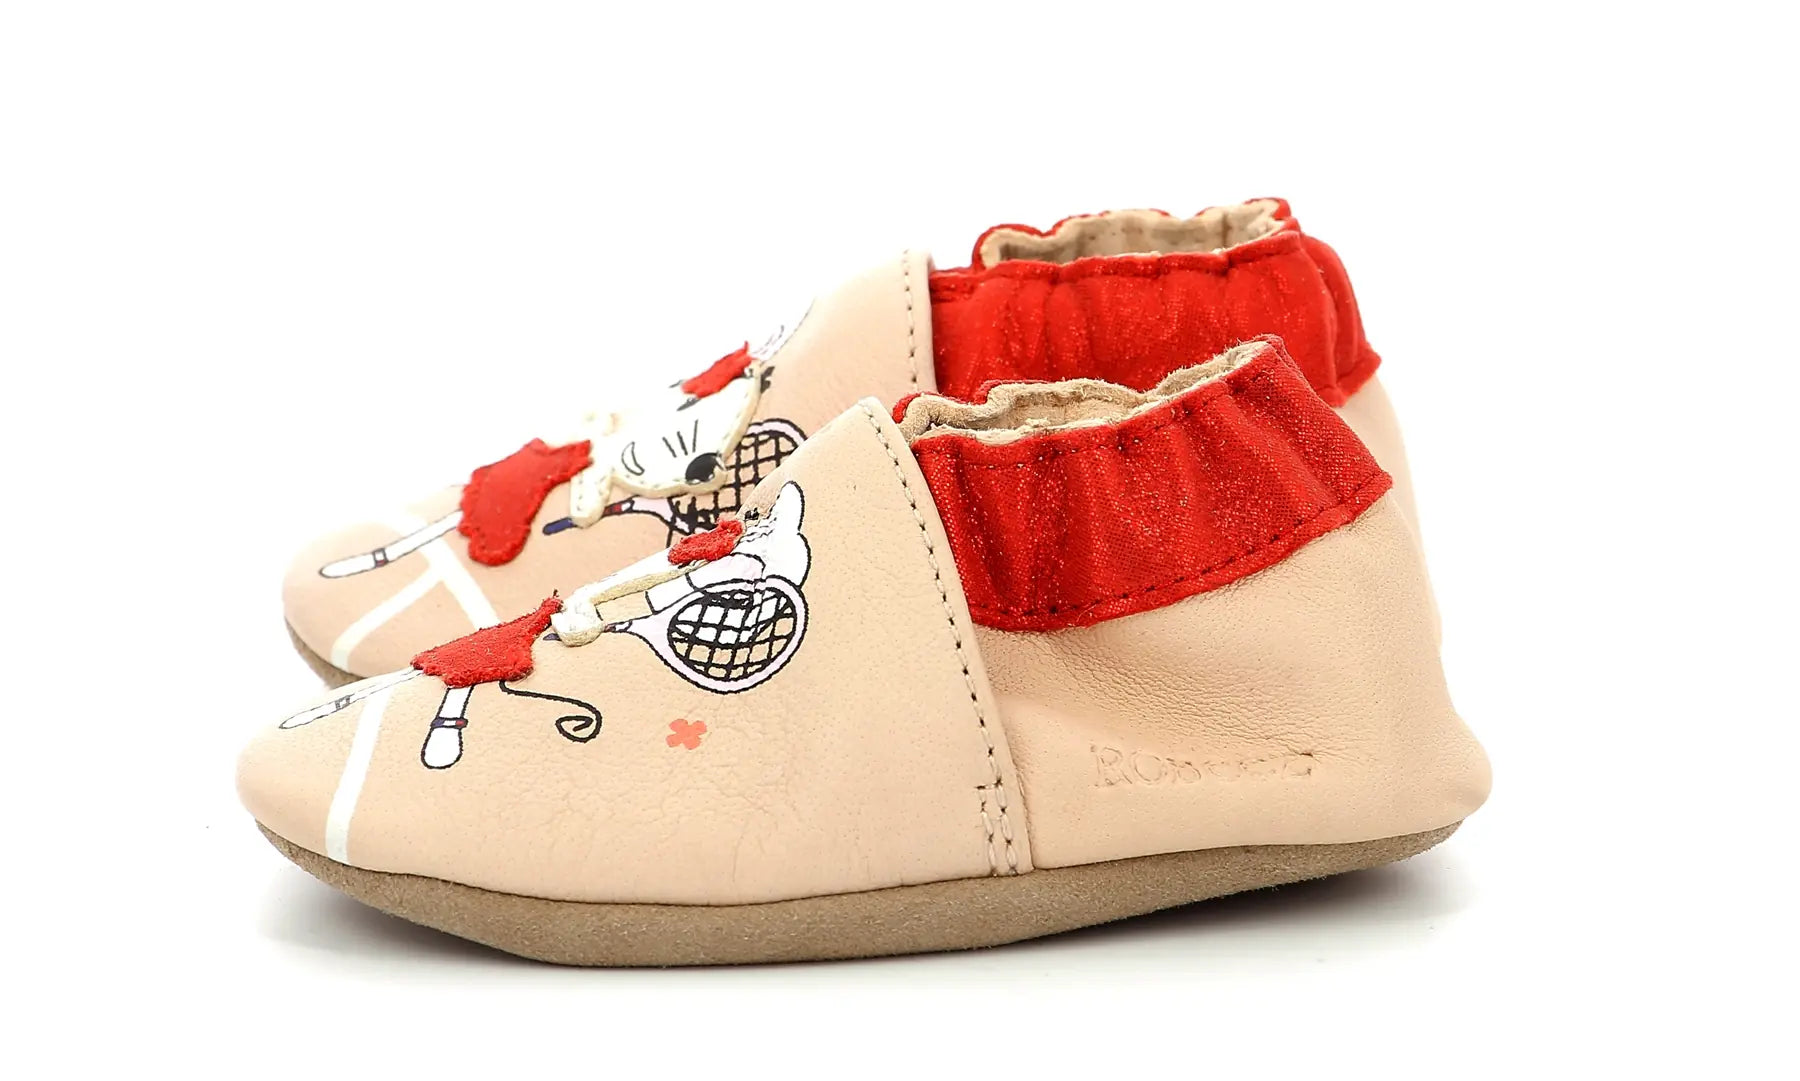 ROBEEZ Chaussons Tennis Mouse Rose Clair Rouge ma petite pointure